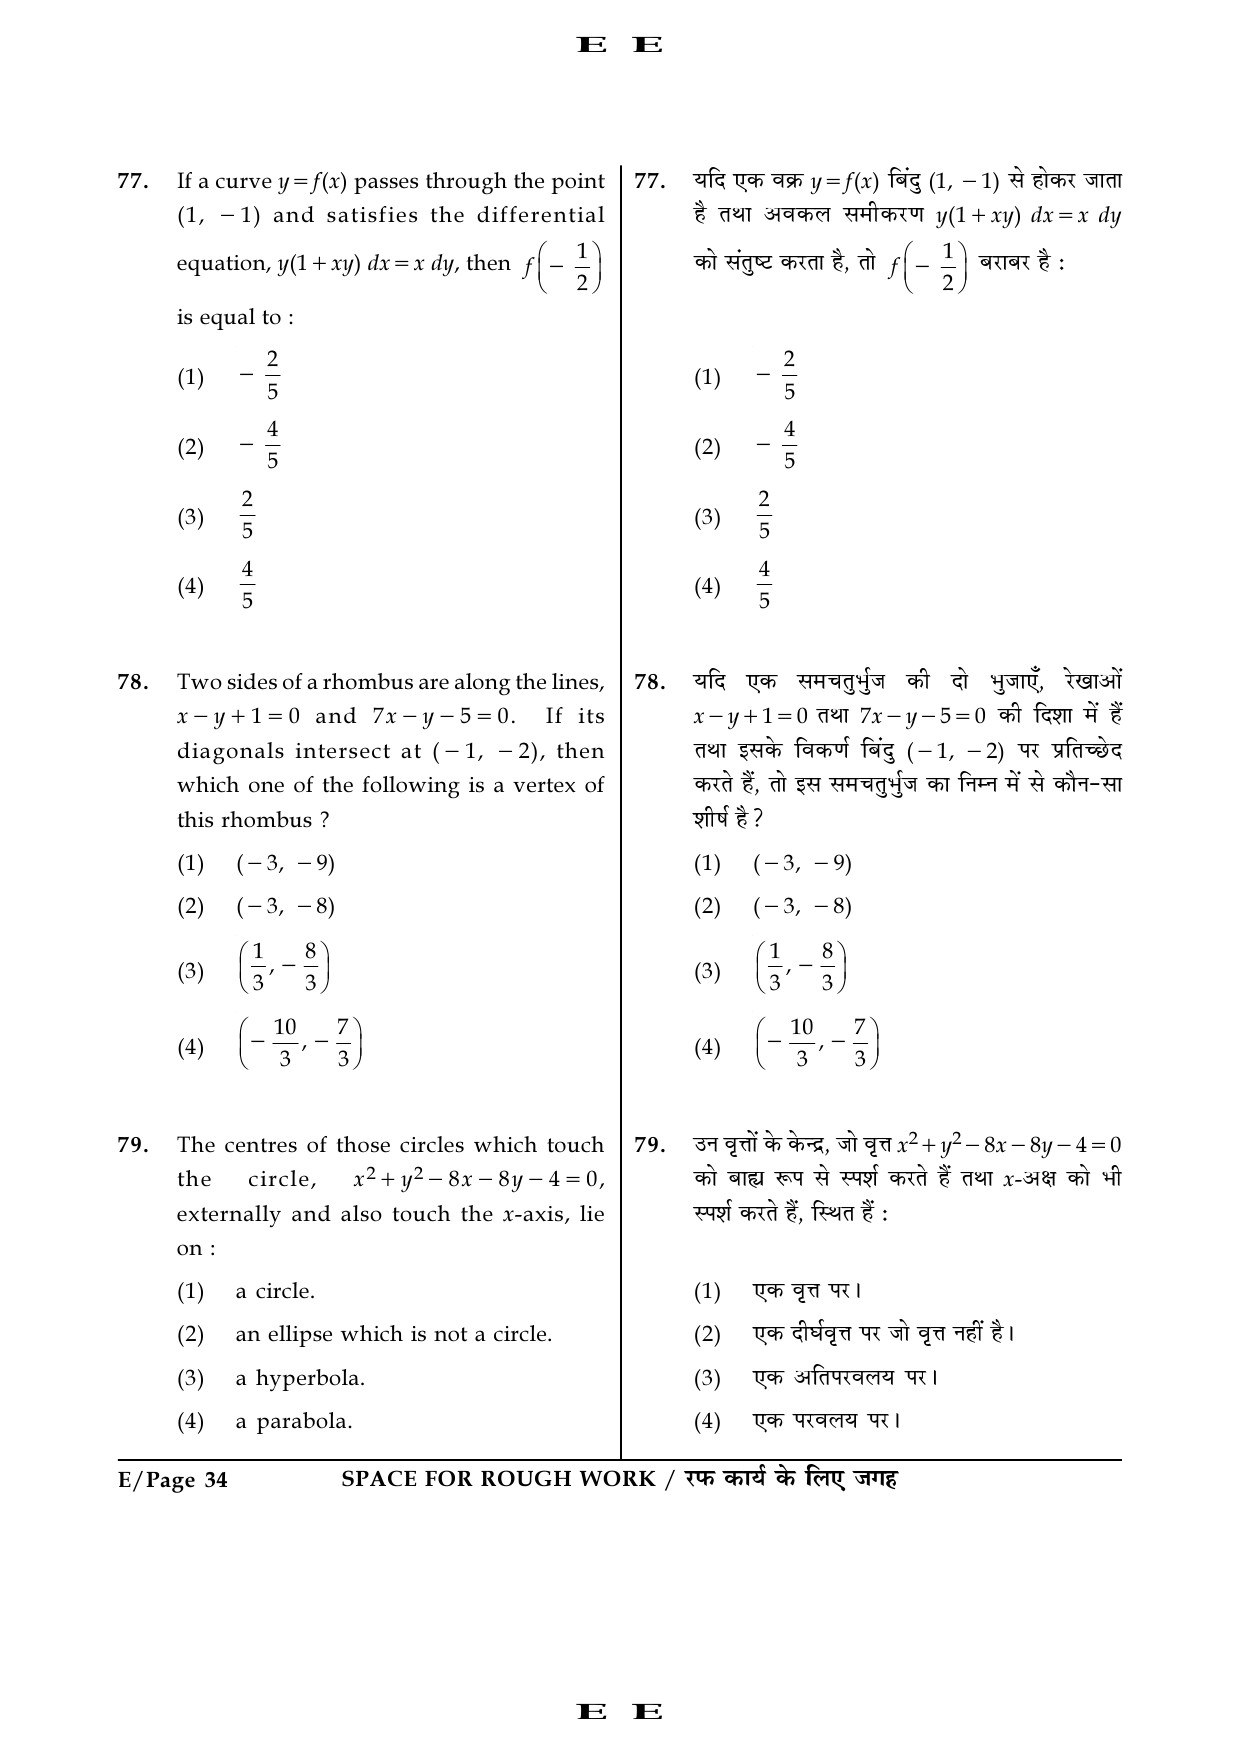 JEE Main Exam Question Paper 2016 Booklet E 34